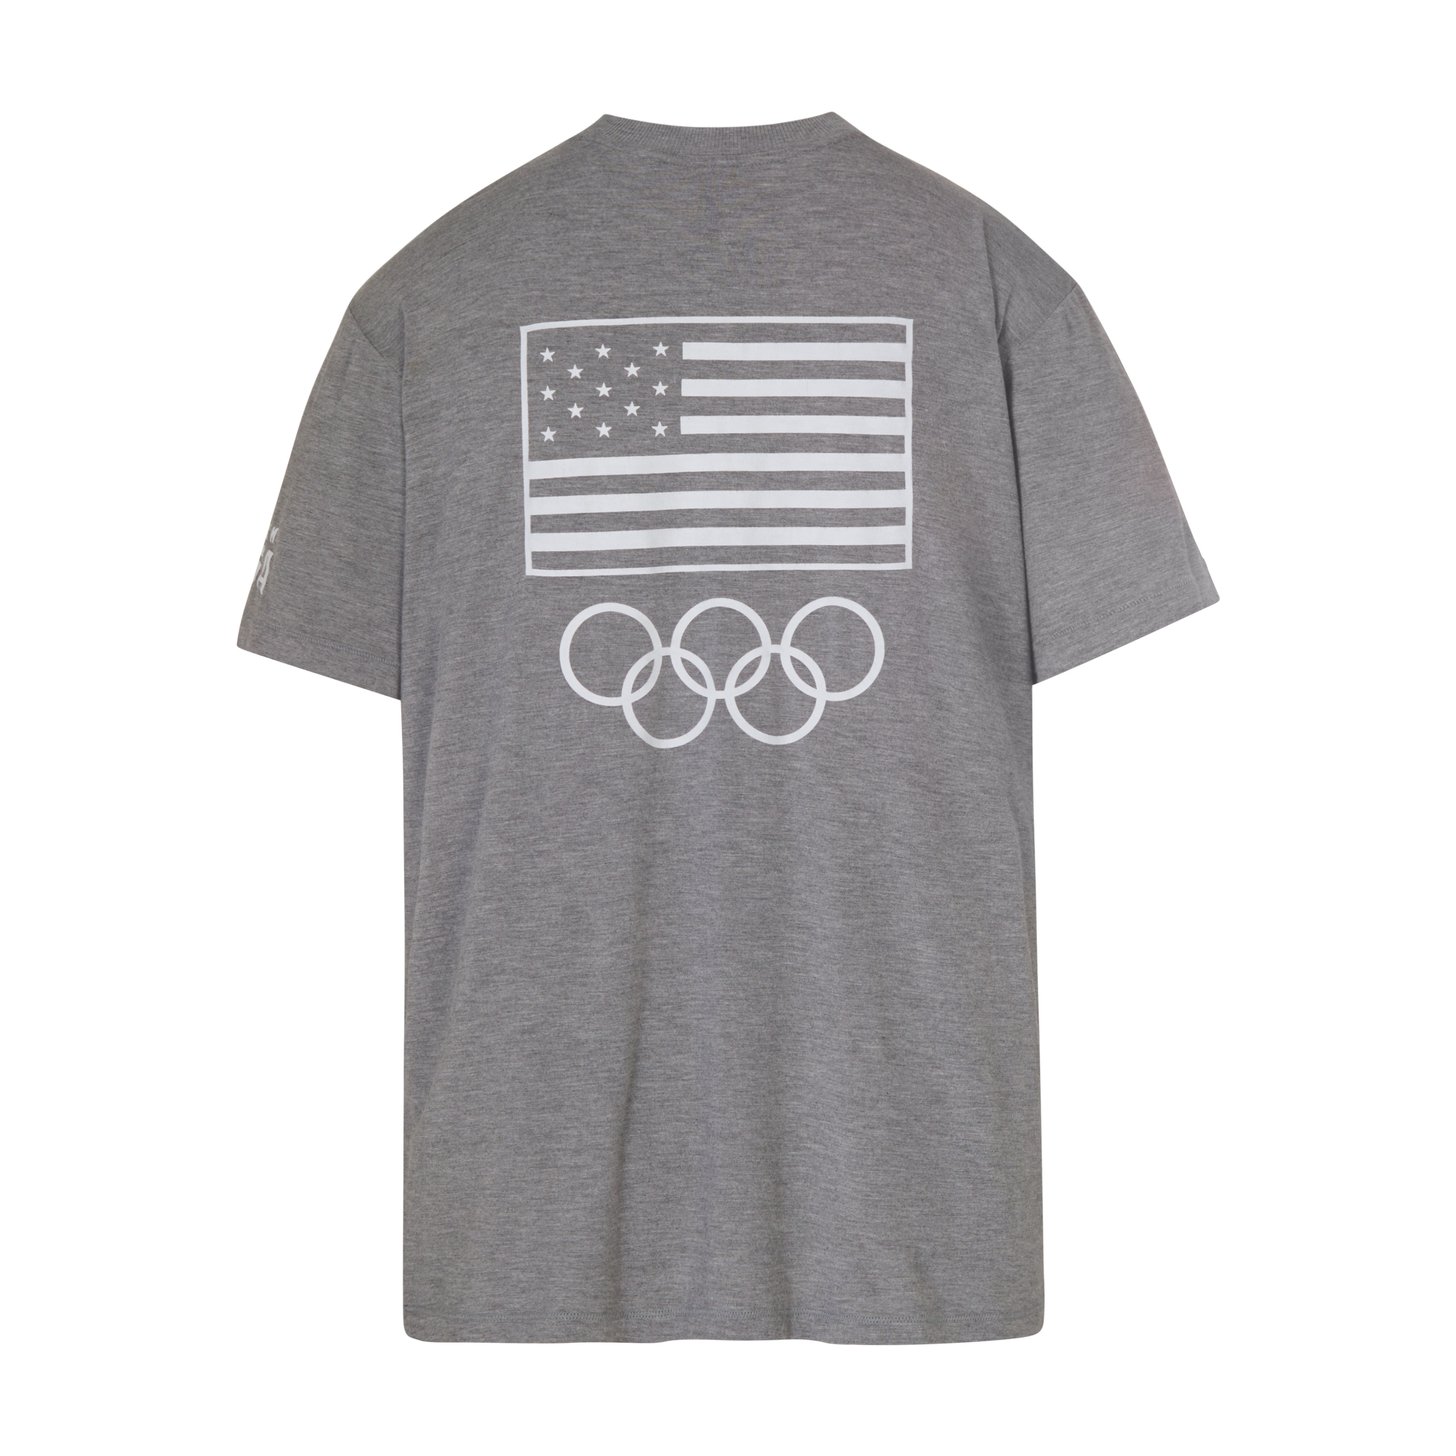 SKIMS Team USA Collection: Shop the SKIMS Olympic Capsule Now